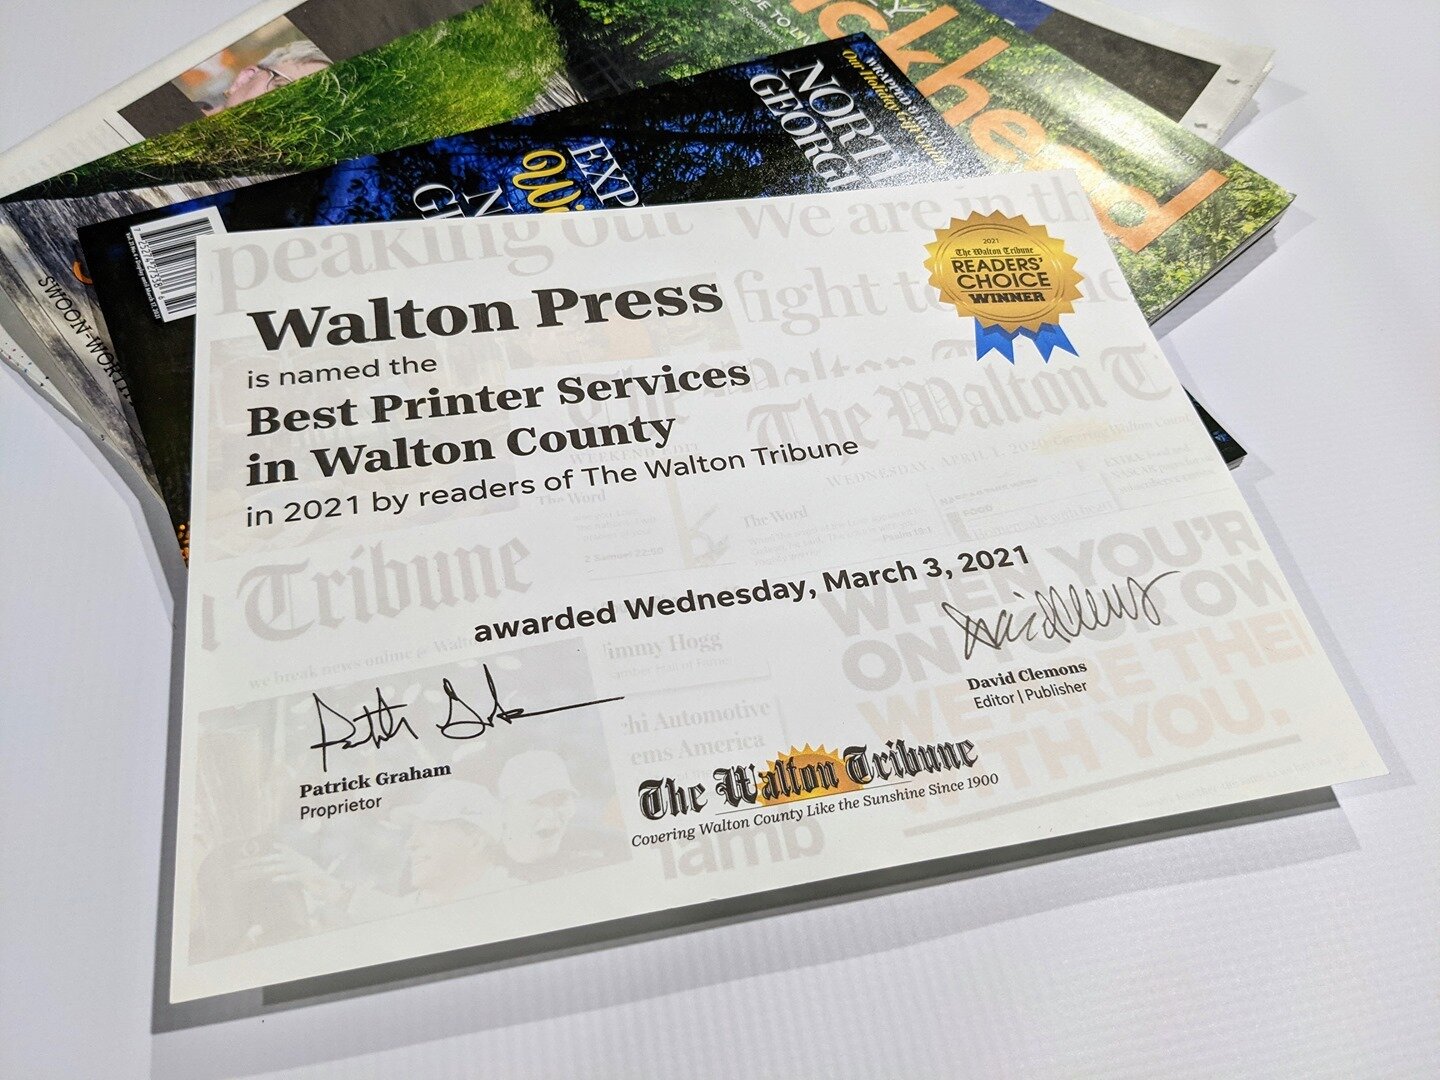 We are honored to be named 'Best Printer Services in Walton County' in 2021 by readers of The Walton Tribune! #waltonpride #waltontribune #printer #community